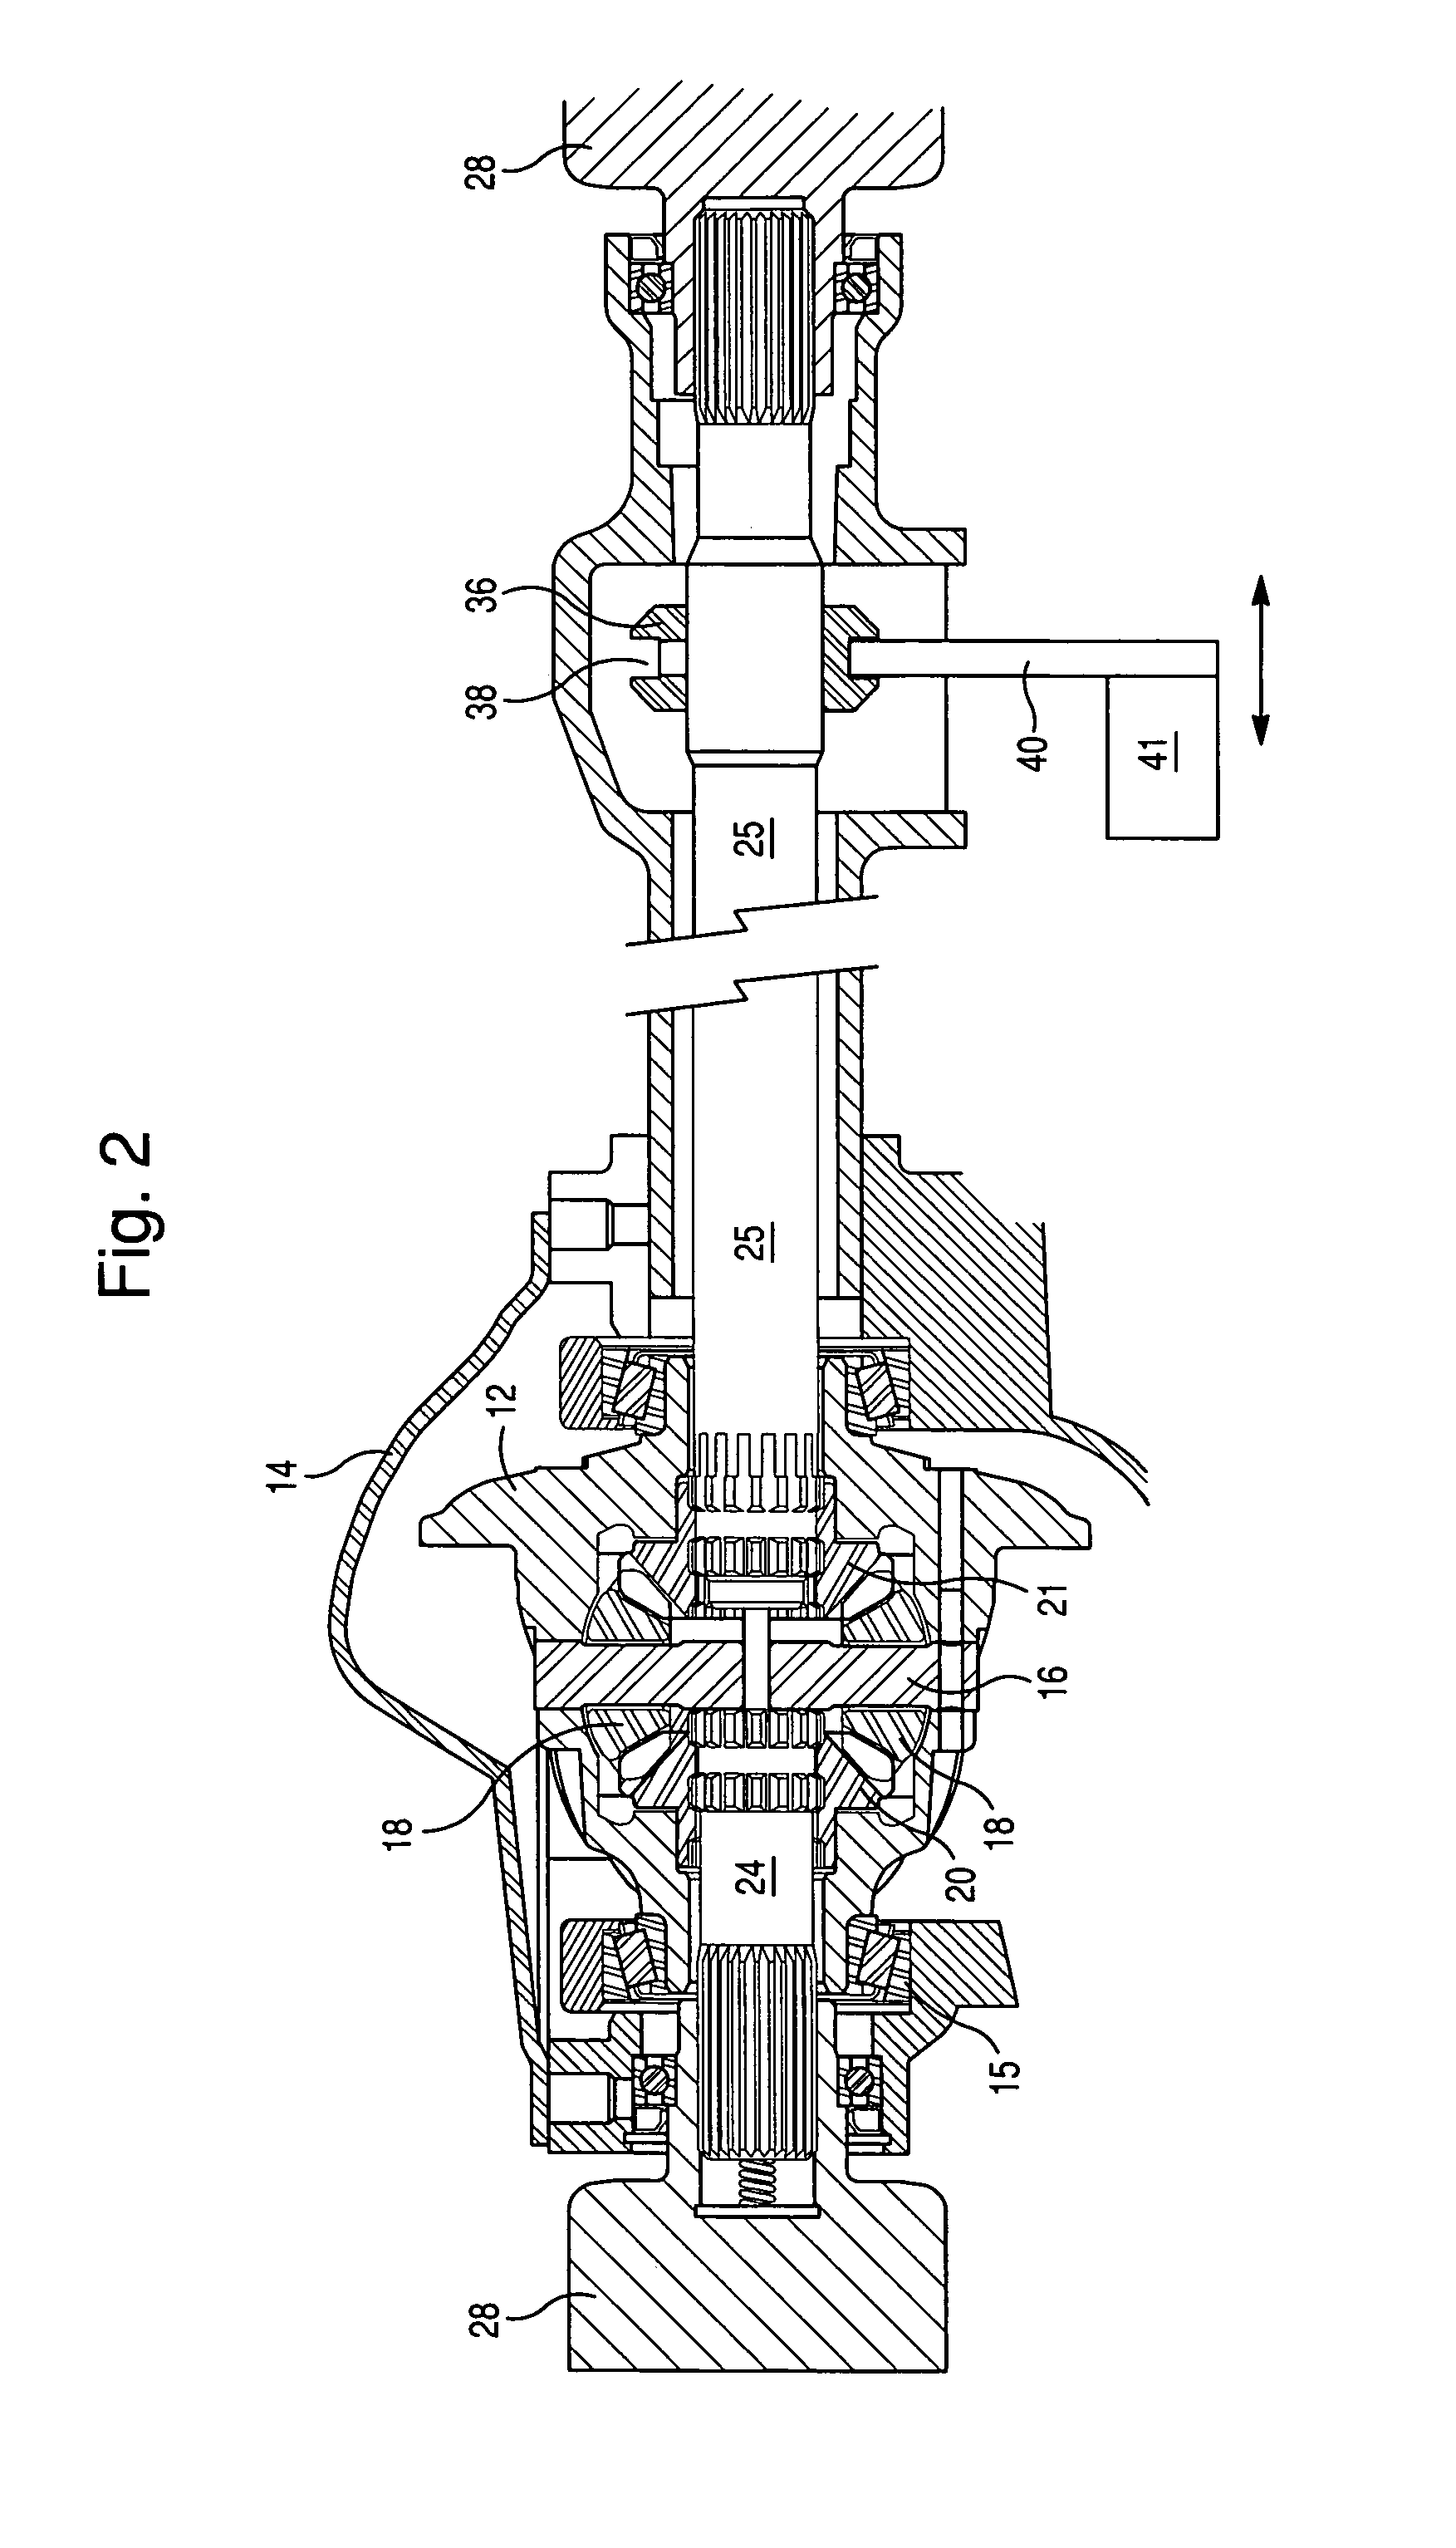 Double disconnect assembly for multi-axle vehicles